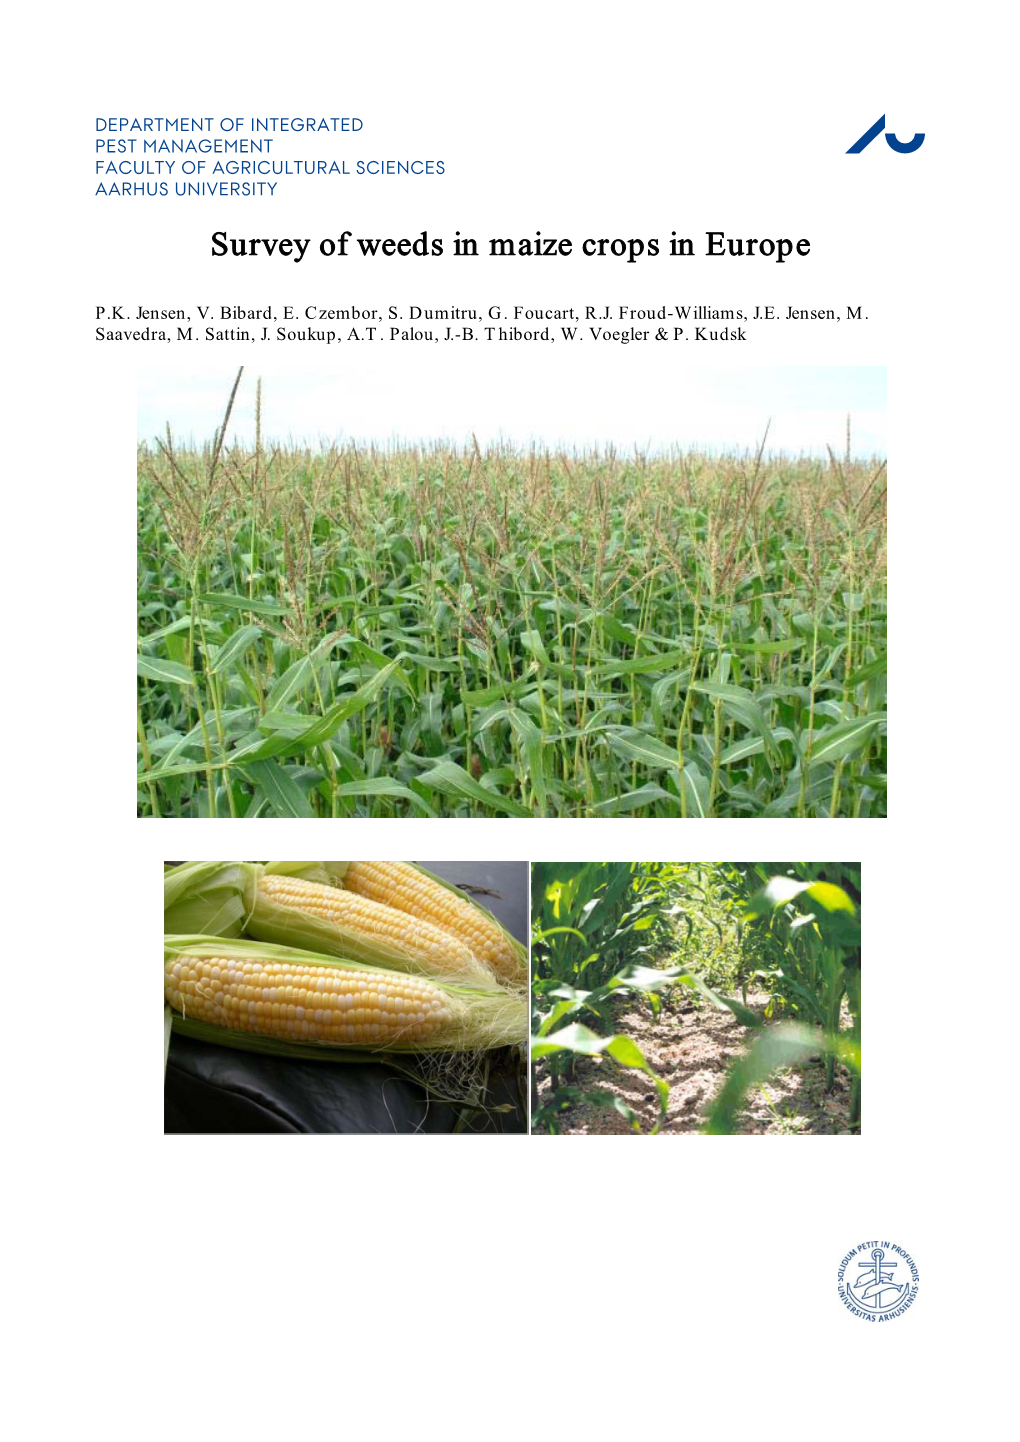 Survey of Weeds in Maize Crops in Europe